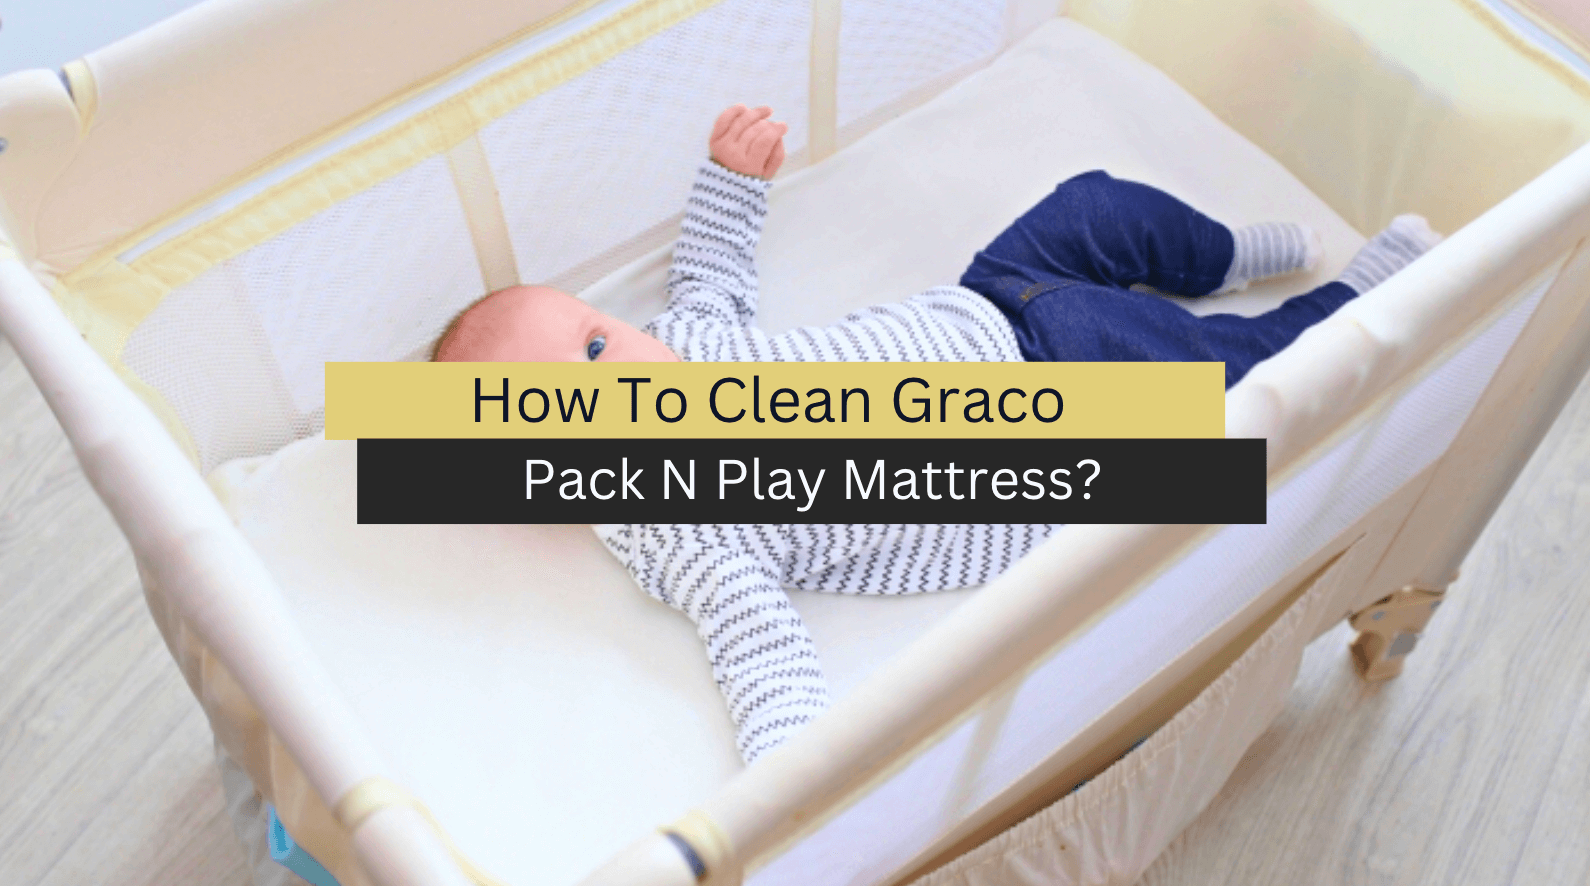 How To Clean Graco Pack N Play Mattress? (3 Easy Ways)